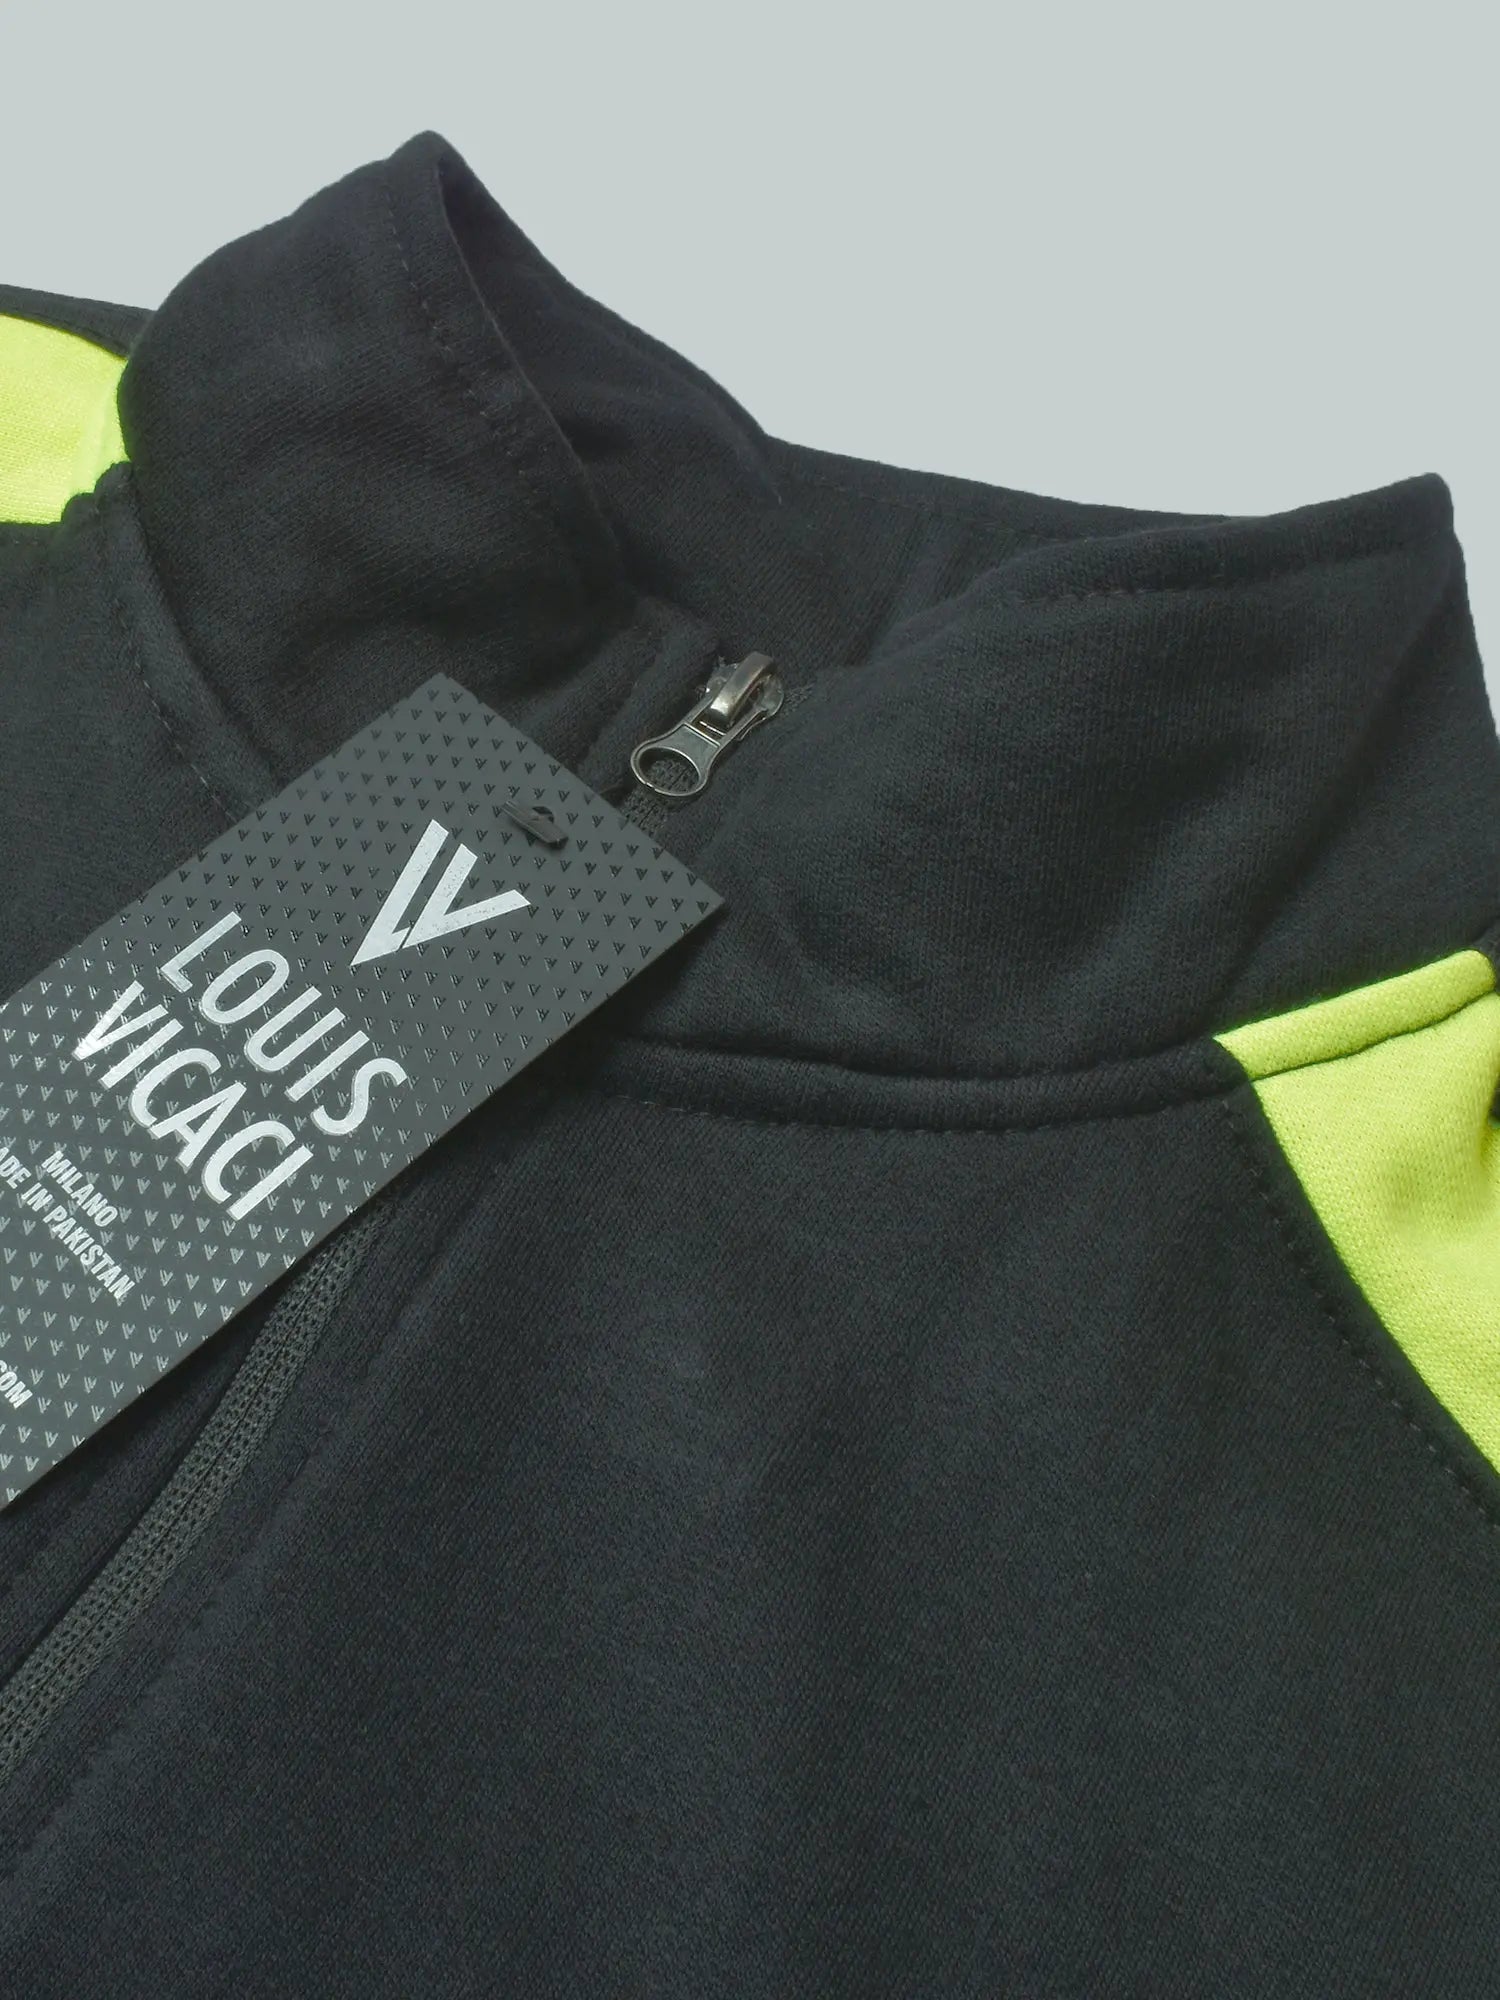 Louis Vicaci Fleece Zipper Tracksuit For Ladies-Dark Slate Grey with Lime Green Stripe-BE17521 Louis Vicaci